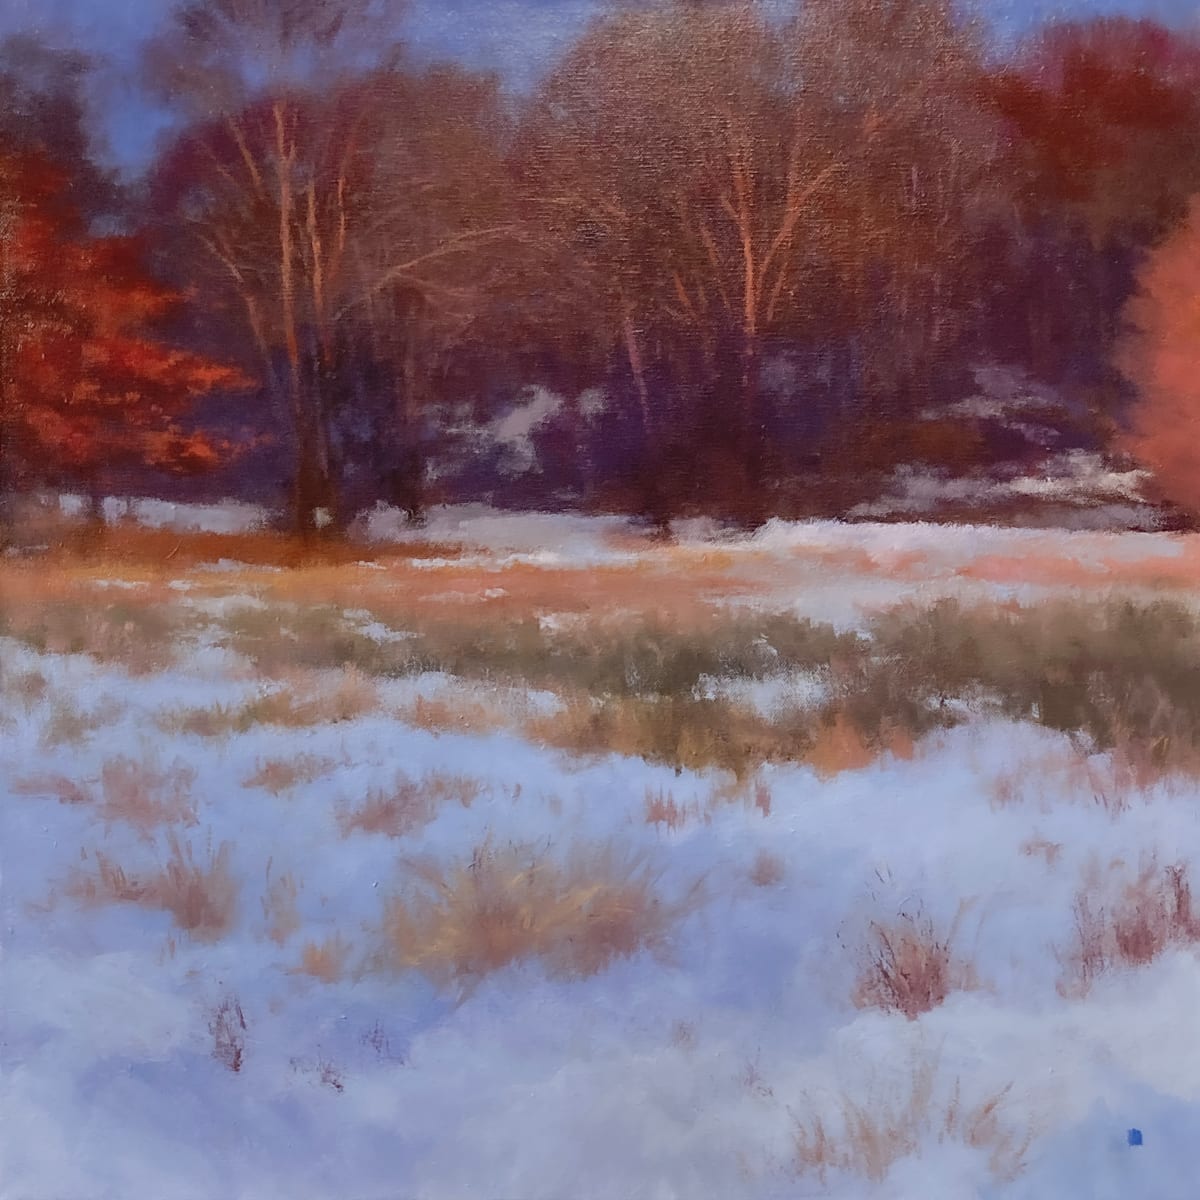 December Morning Light, Stroud Series by Gregory Blue 